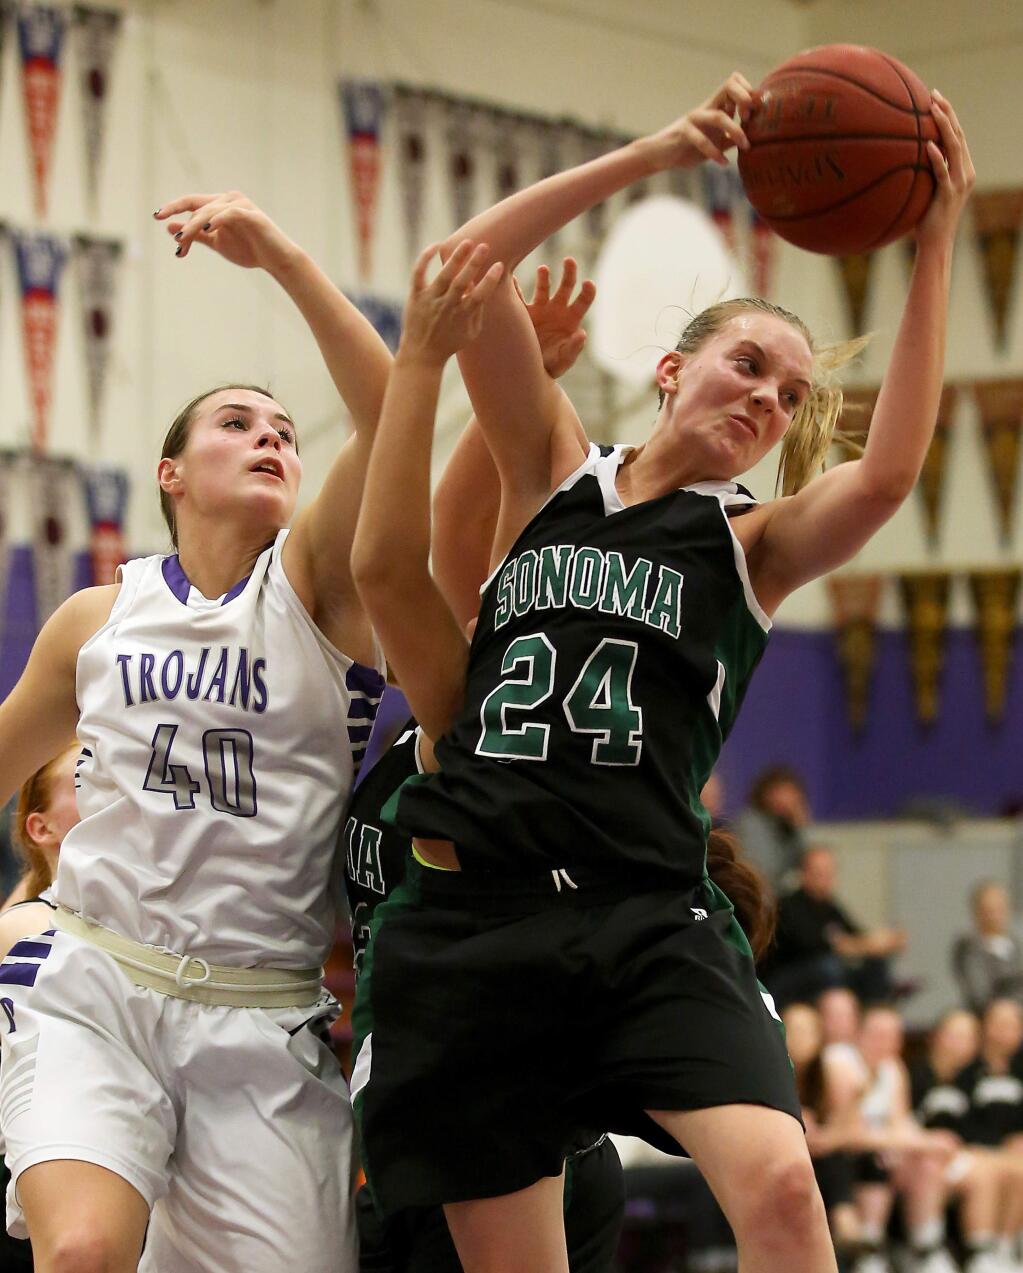 Sonoma Valley's Renee O'Donnell, right, comes down with the rebound against Petaluma's Joelle Krist during the game held at Petaluma High School, Tuesday, January 27, 2015. (Crista Jeremiason / The Press Democrat)